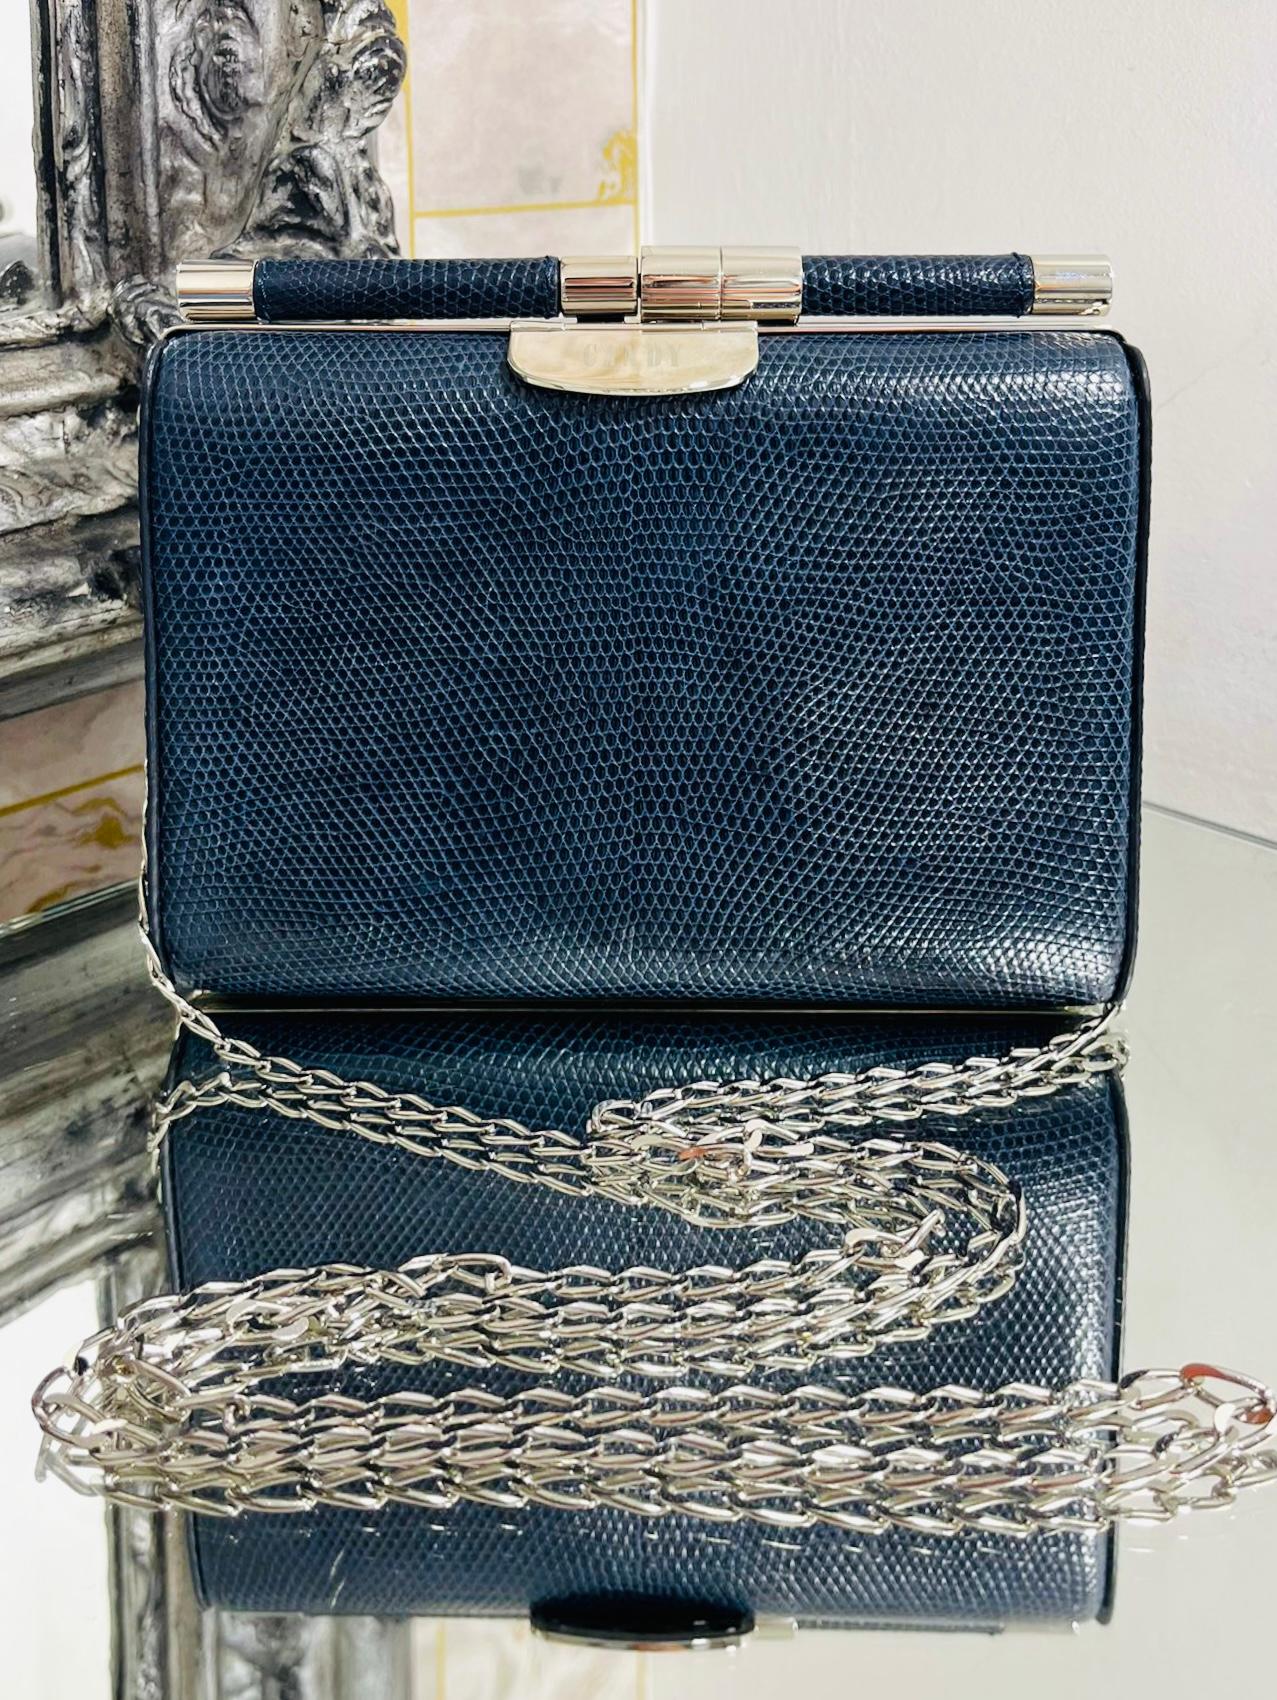 Tyler Ellis Lizard Skin Clutch Bag With Chain Strap

Dark grey, structured 'Jamie' evening bag in exotic leather.

Detailed with silver hardware which has been personalised with 'Candy' lettering.

Featuring detachable shoulder chain strap and